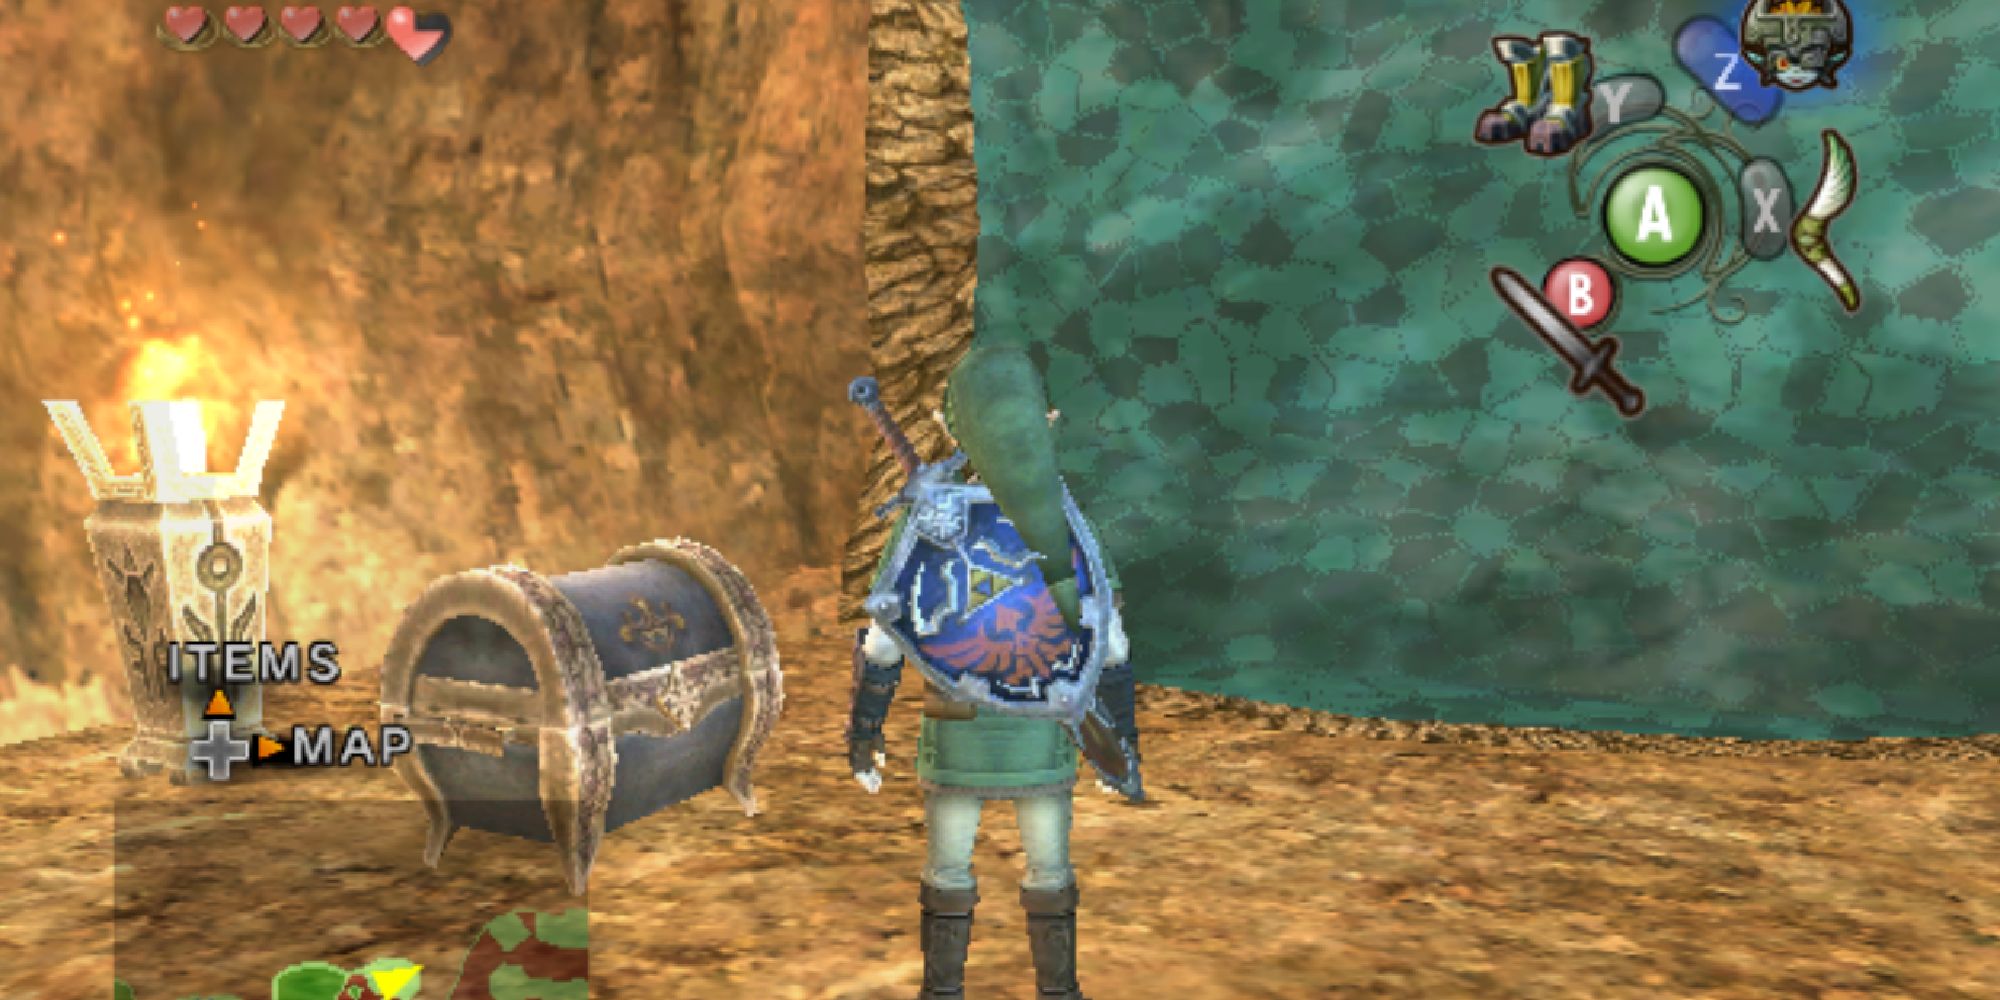 A screenshot of the Goron Mines dungeon in The Legend of Zelda: Twilight Princess, showing Link gazing at a treasure chest next to an iridescent blue magnet wall